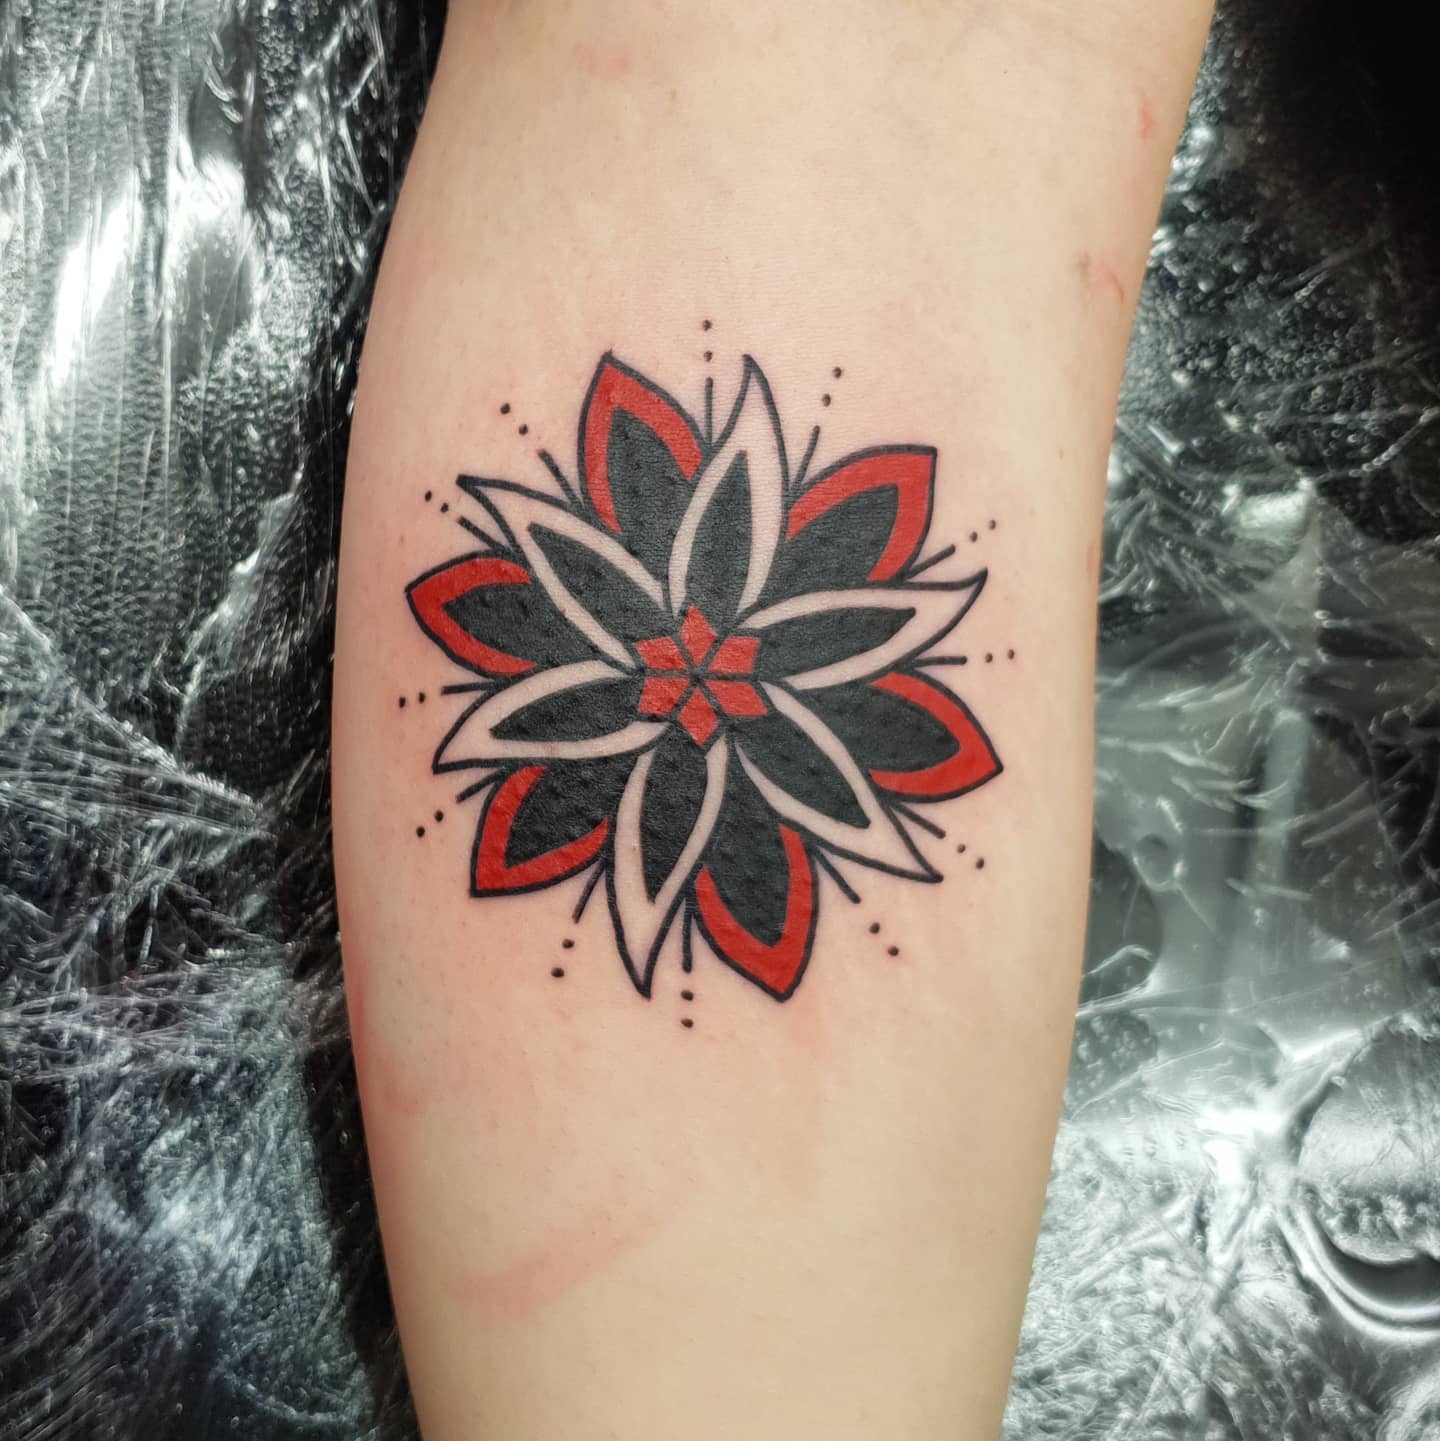 All the Piercings and Body Mods  Geometric flower tattoo by Shubeytattoos